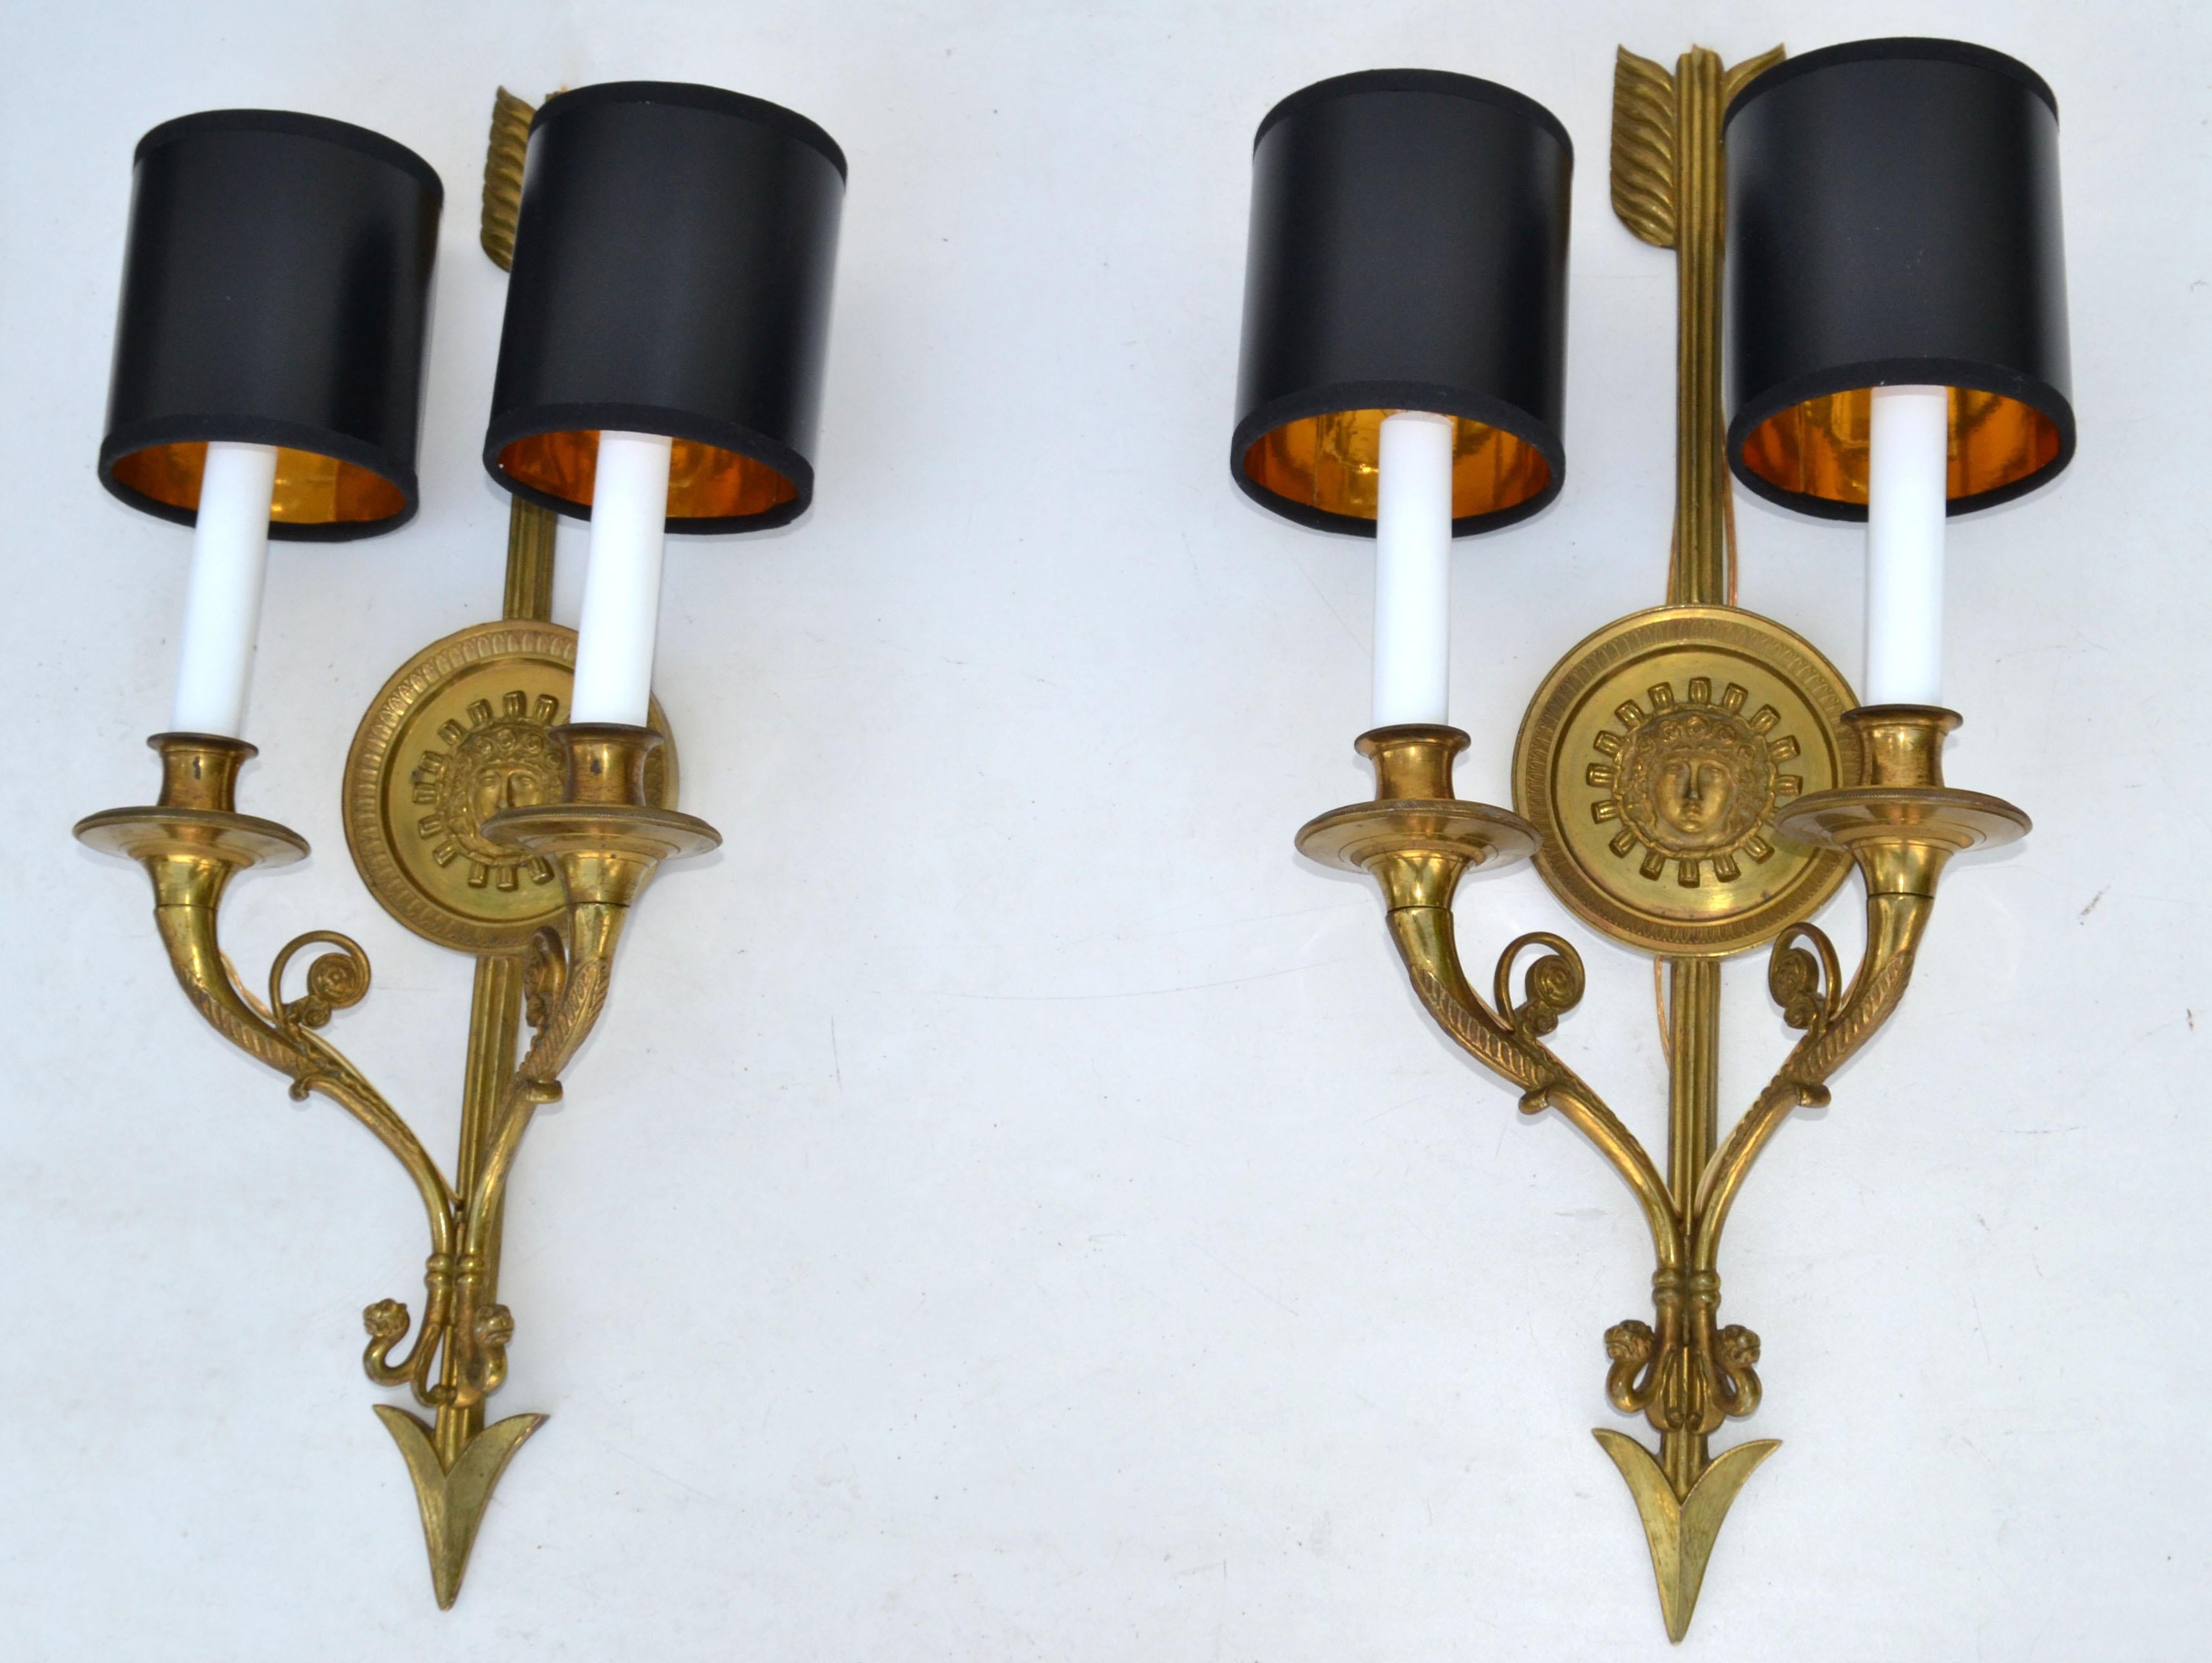 Superb pair of Andre Arbus style arrow sconces, wall lights in bronze with black & gold clip on Paper Shades.
US Rewired and in working condition, each Sconce takes 2 light bulbs with max 40 watts.
Custom back-plate available.
Measures: Back